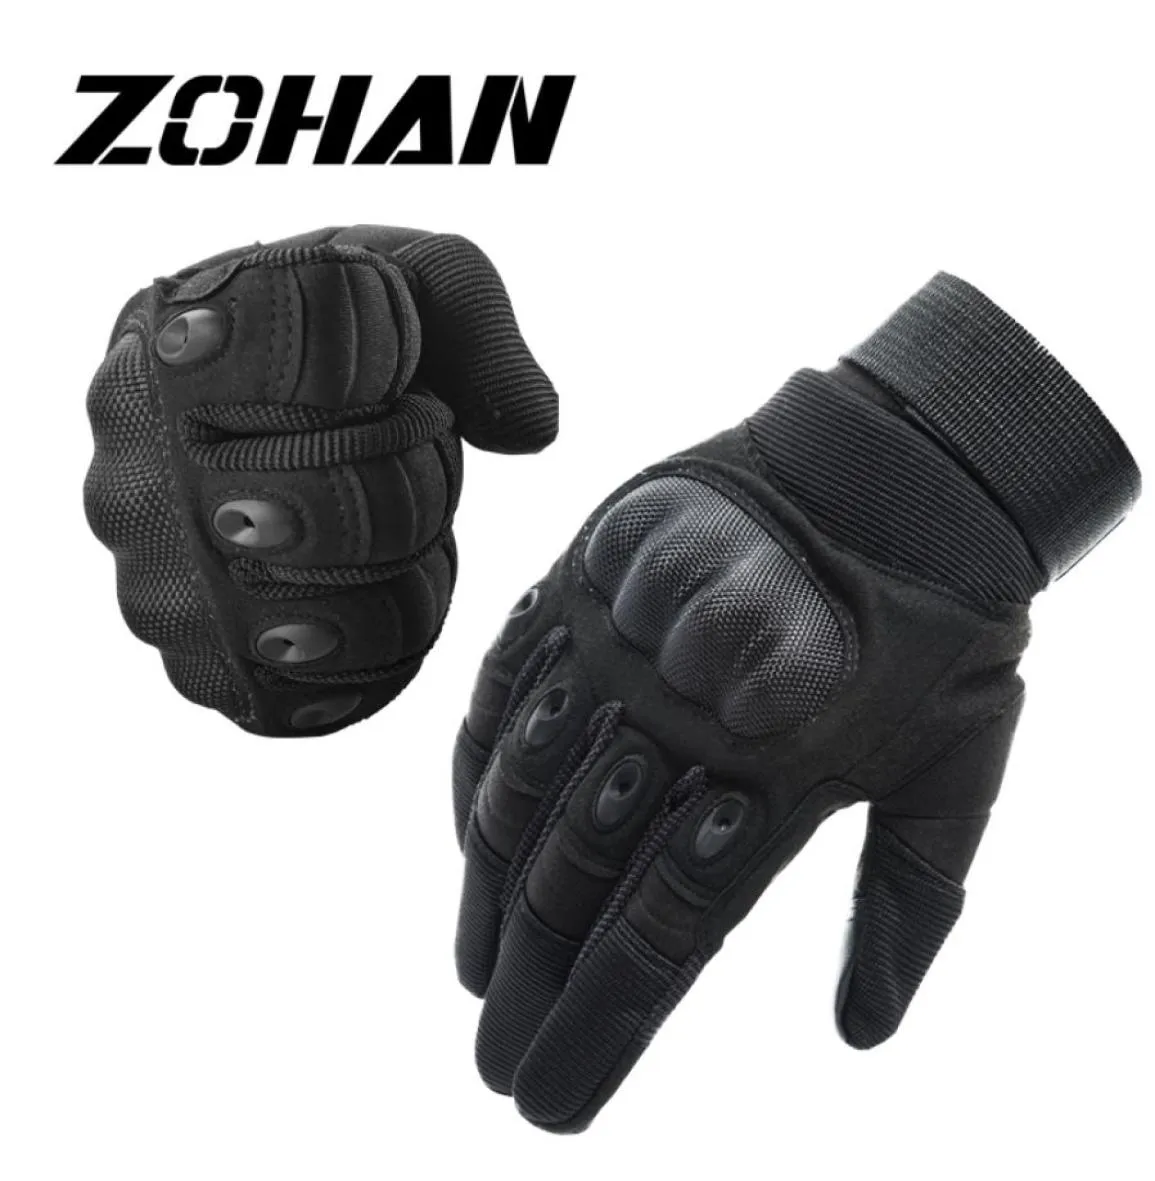 Tactical Gloves Hunting Men Full Finger Knuckles Glove Antiskid Sn Touch for Shooting Motos Cycling Outdoor4235457